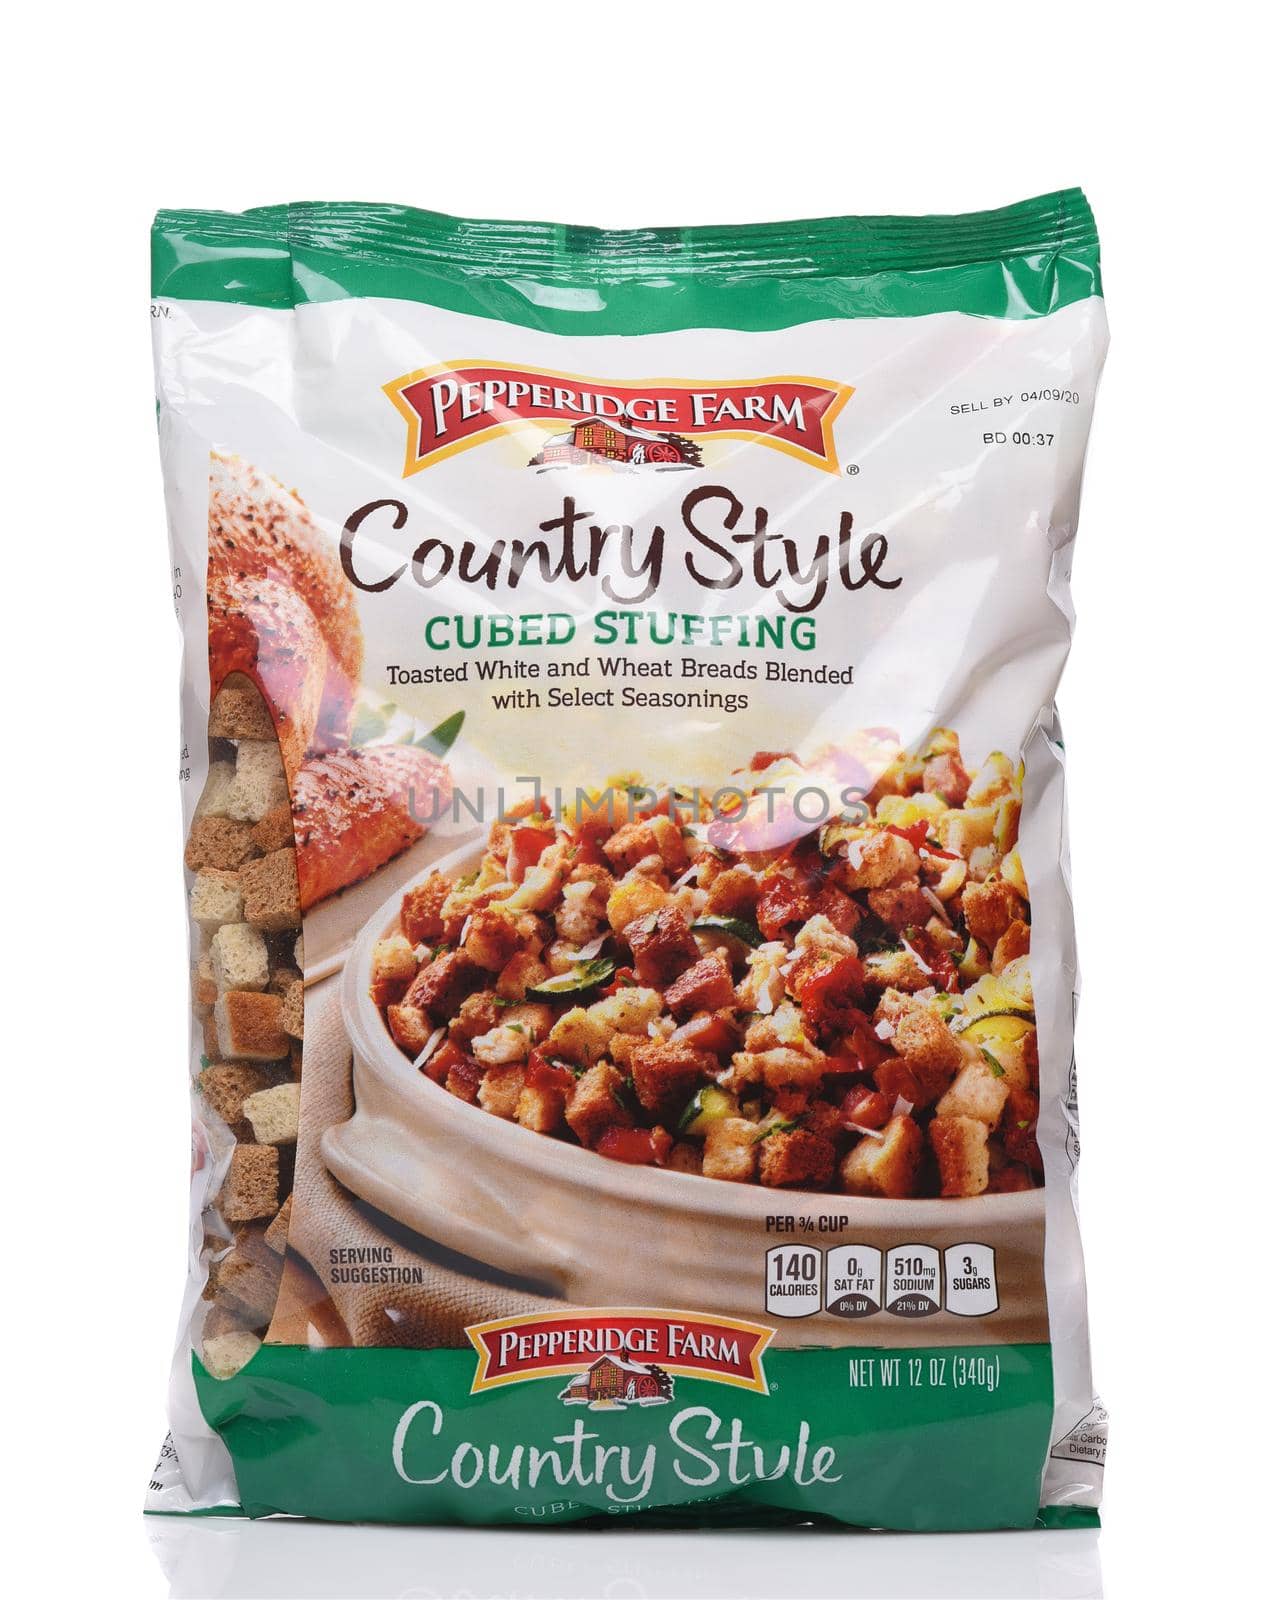 IRVINE, CALIFORNIA - 24 DECEMBER 2019: A package of Pepperidge Farms Country Style Cubed Stuffing. 